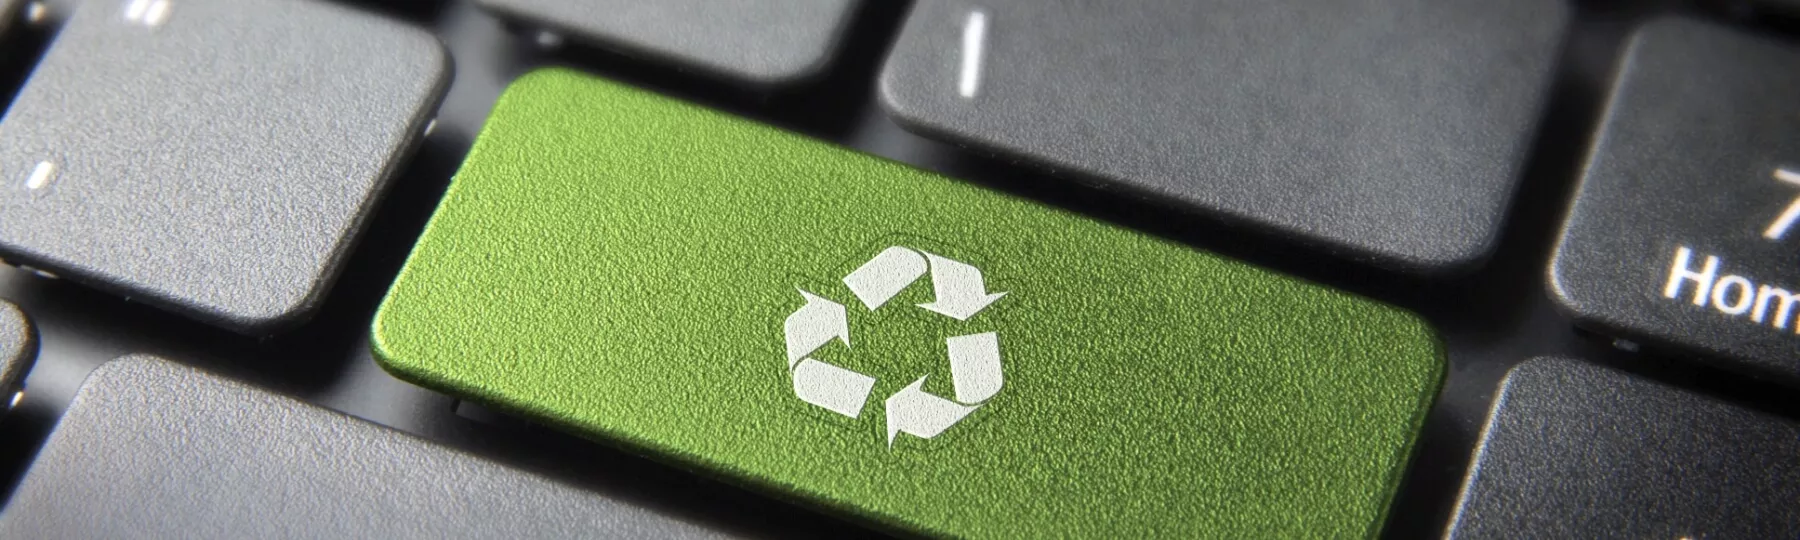 Recycling Program for Discarded E-waste